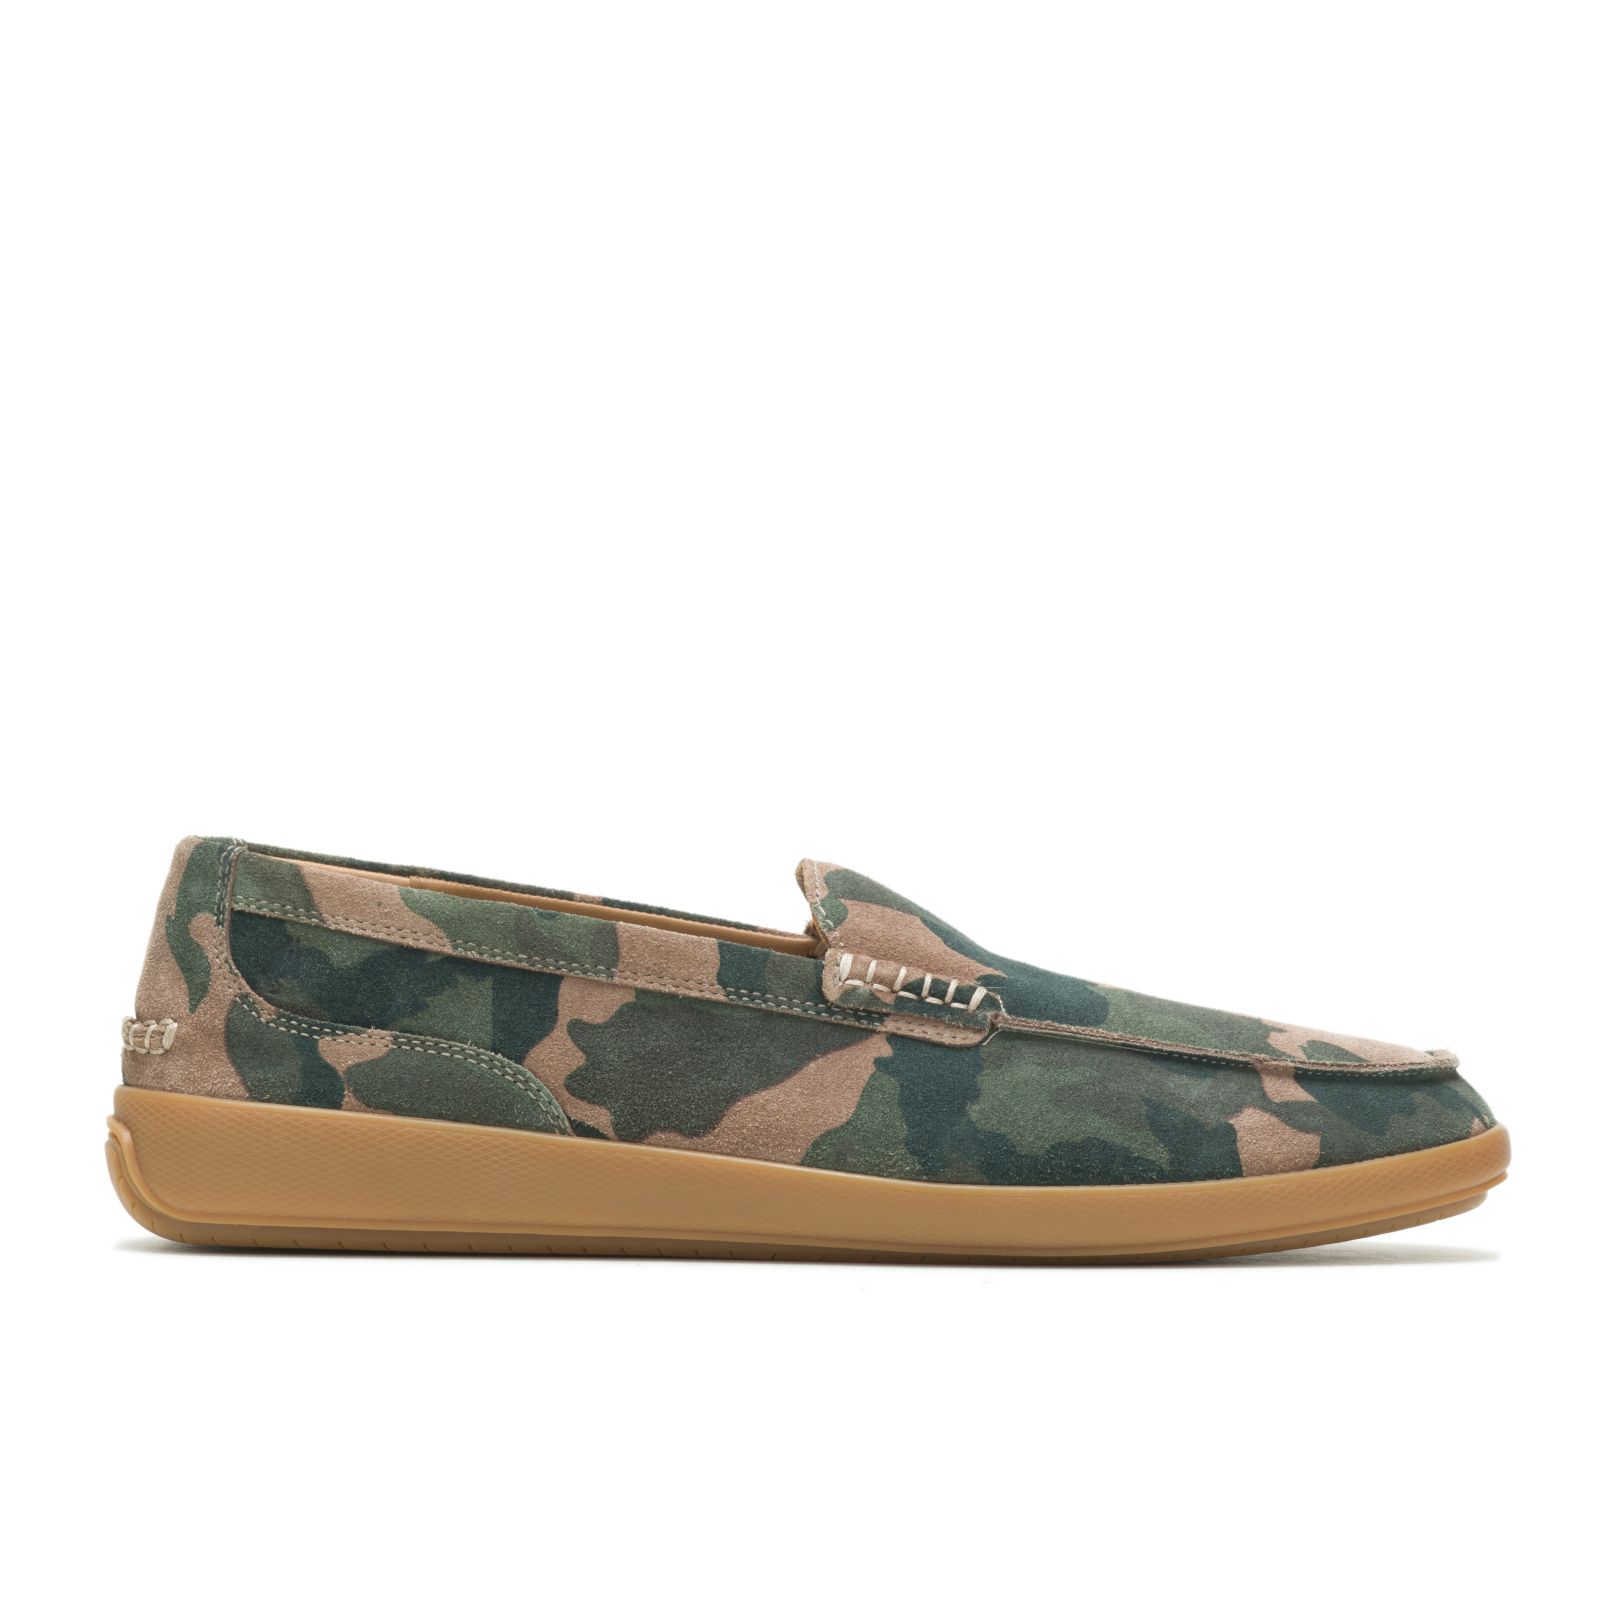 Loafers Hush Puppies Finley Hombre Camuflados | OHPGAVD-80